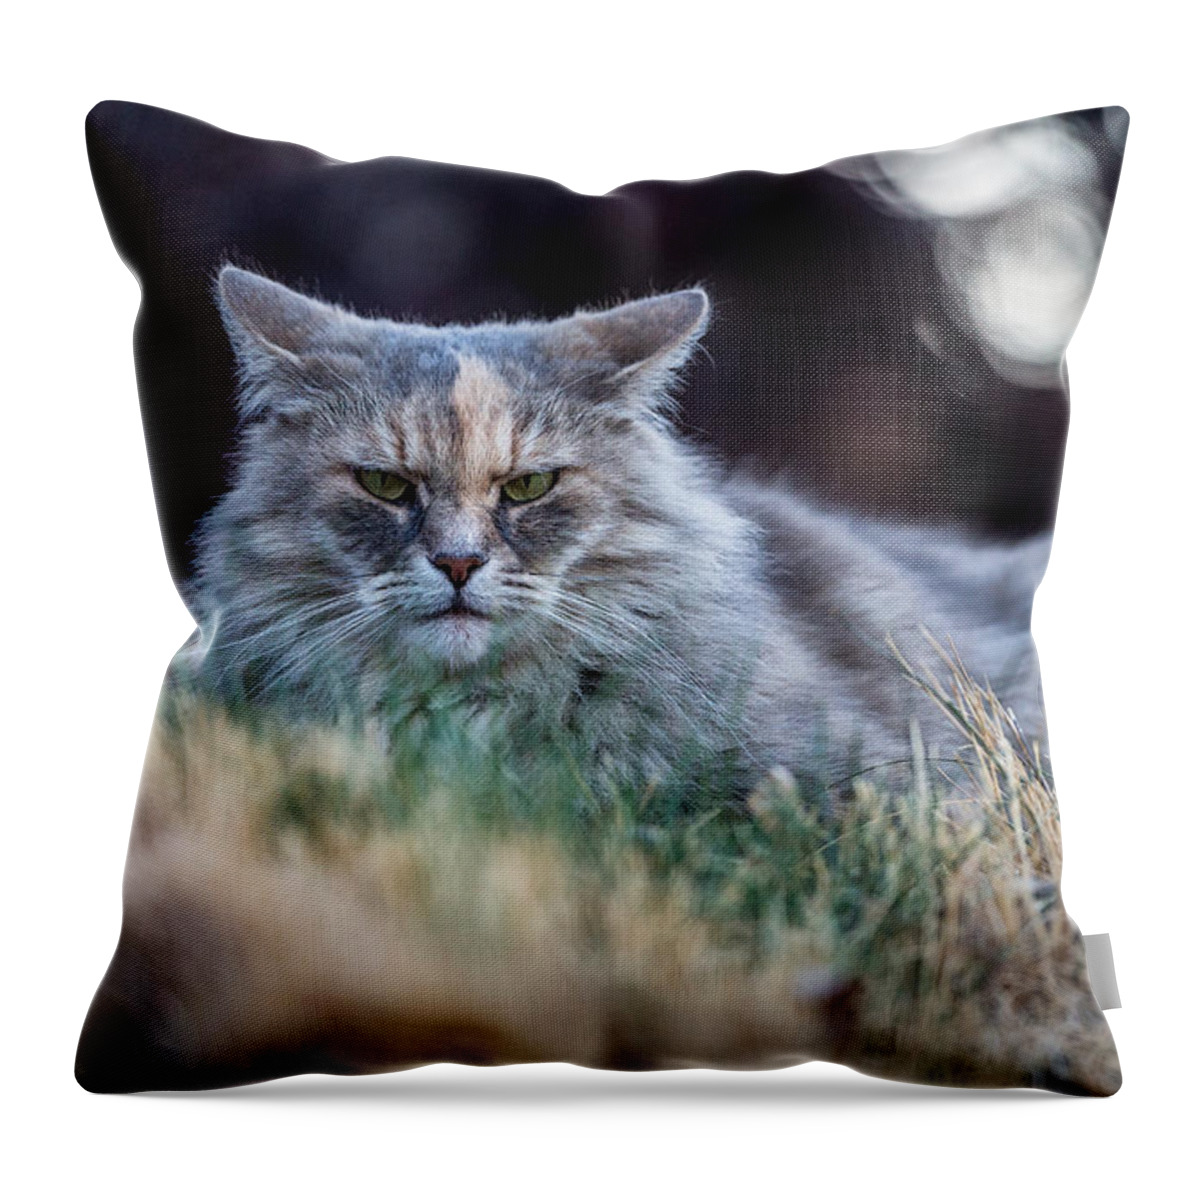 Cat Throw Pillow featuring the photograph Disturbed Cat - Grace by Everet Regal